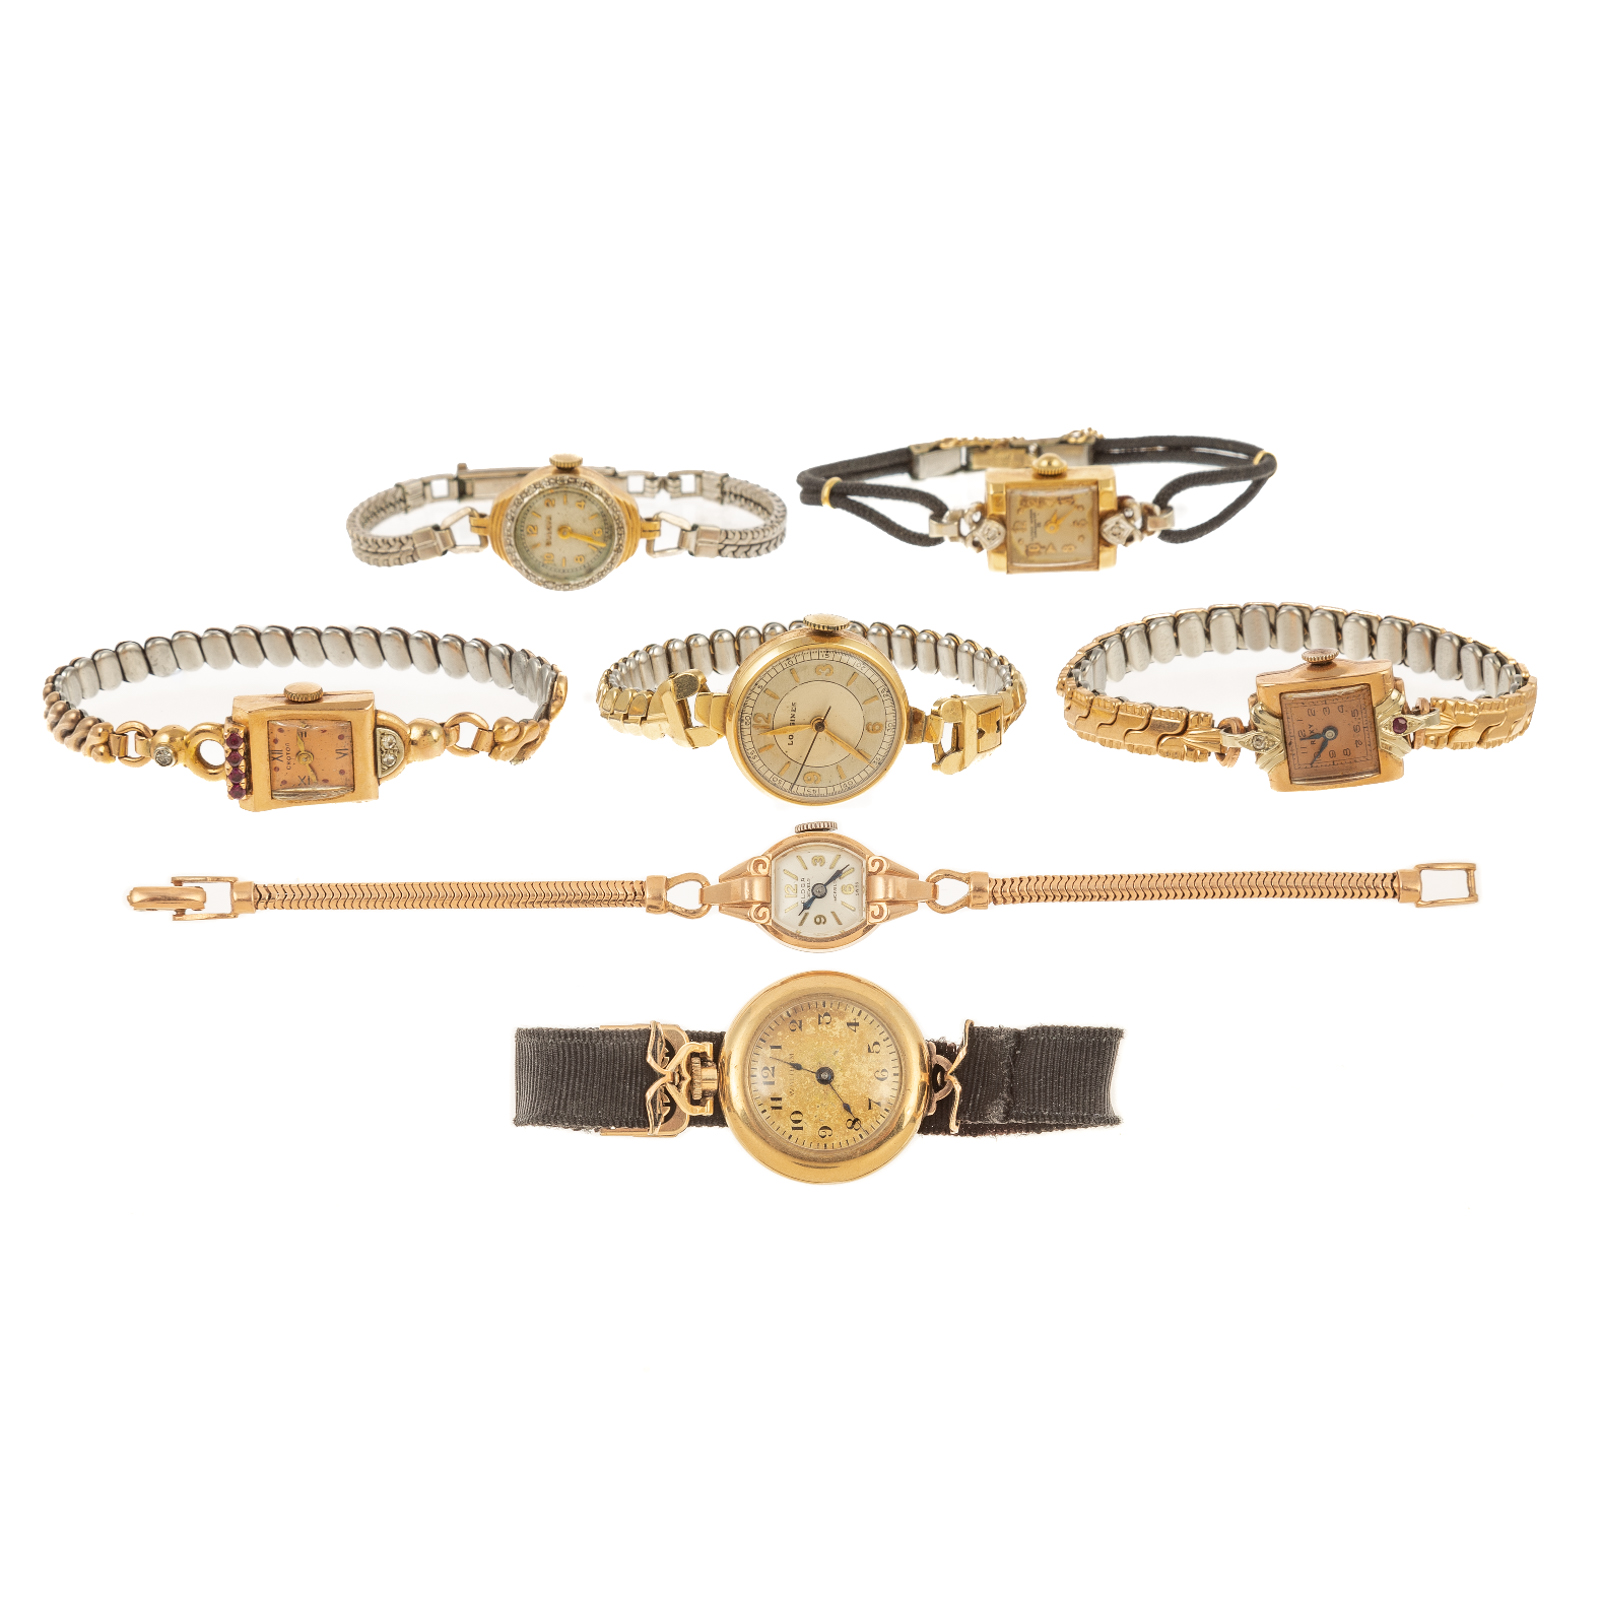 A LARGE COLLECTION OF 14K WRIST